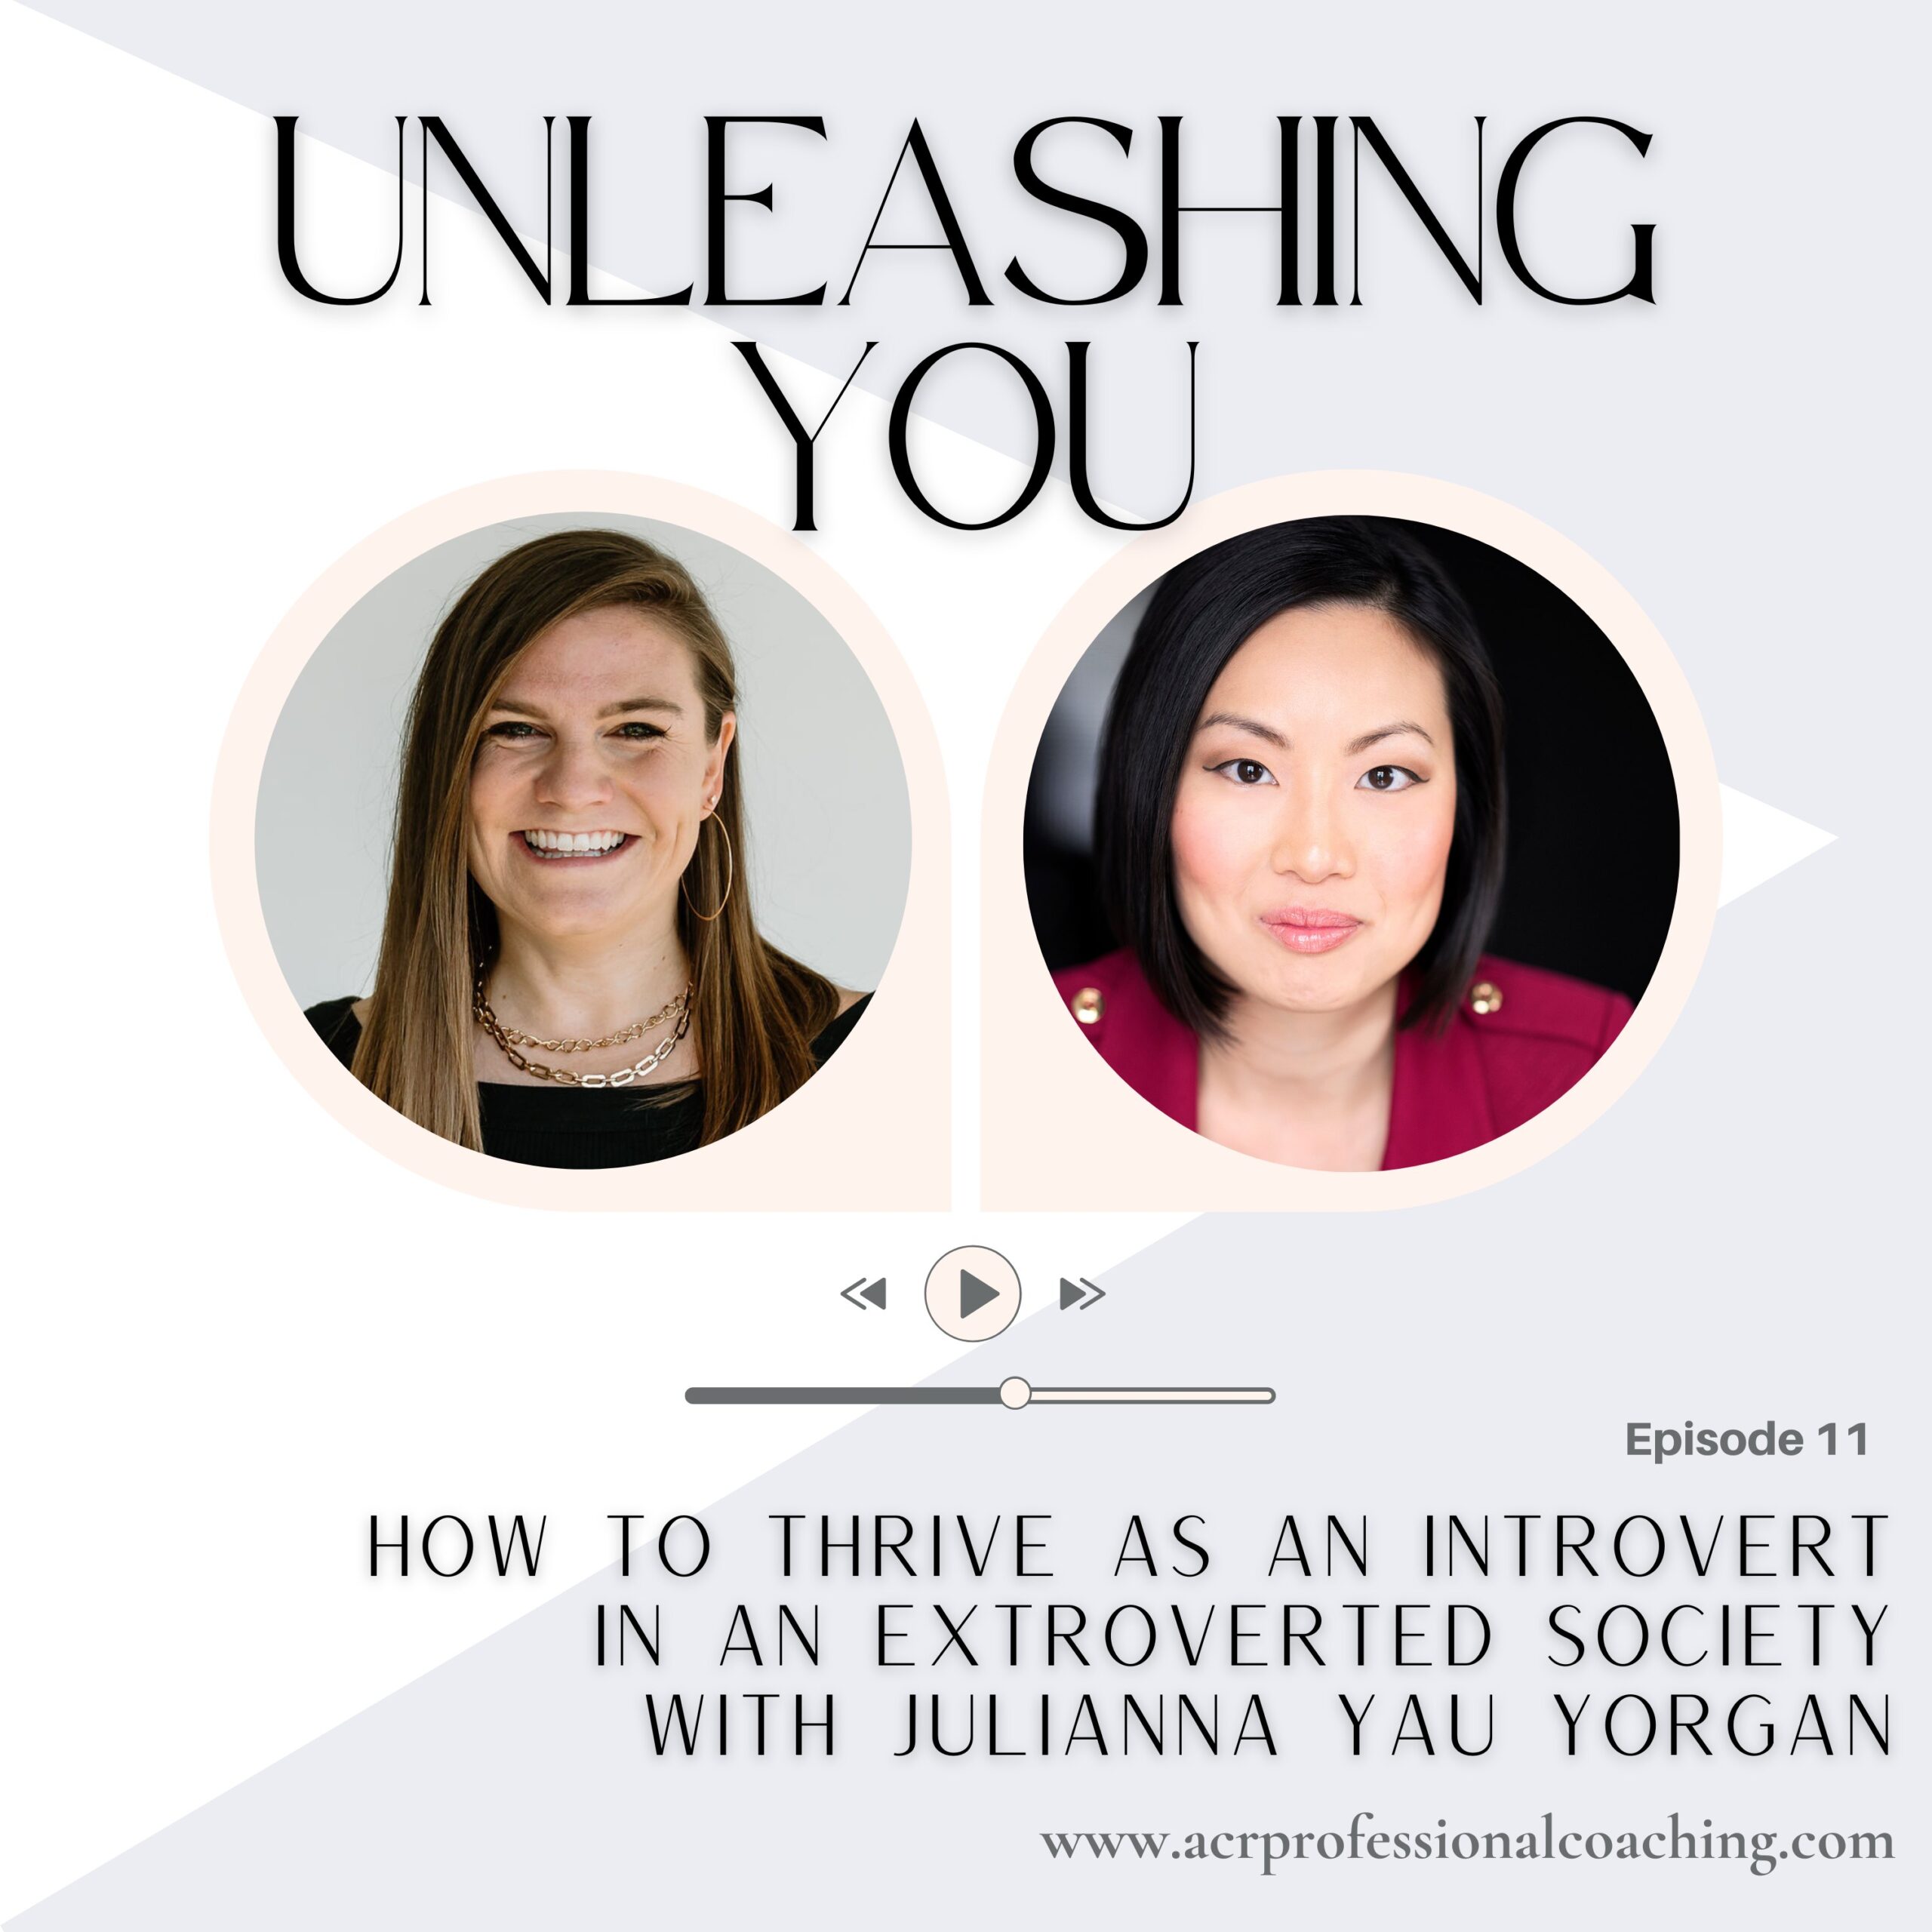 How to Thrive as an Introvert in an Extroverted Society with Julianna Yau Yorgan